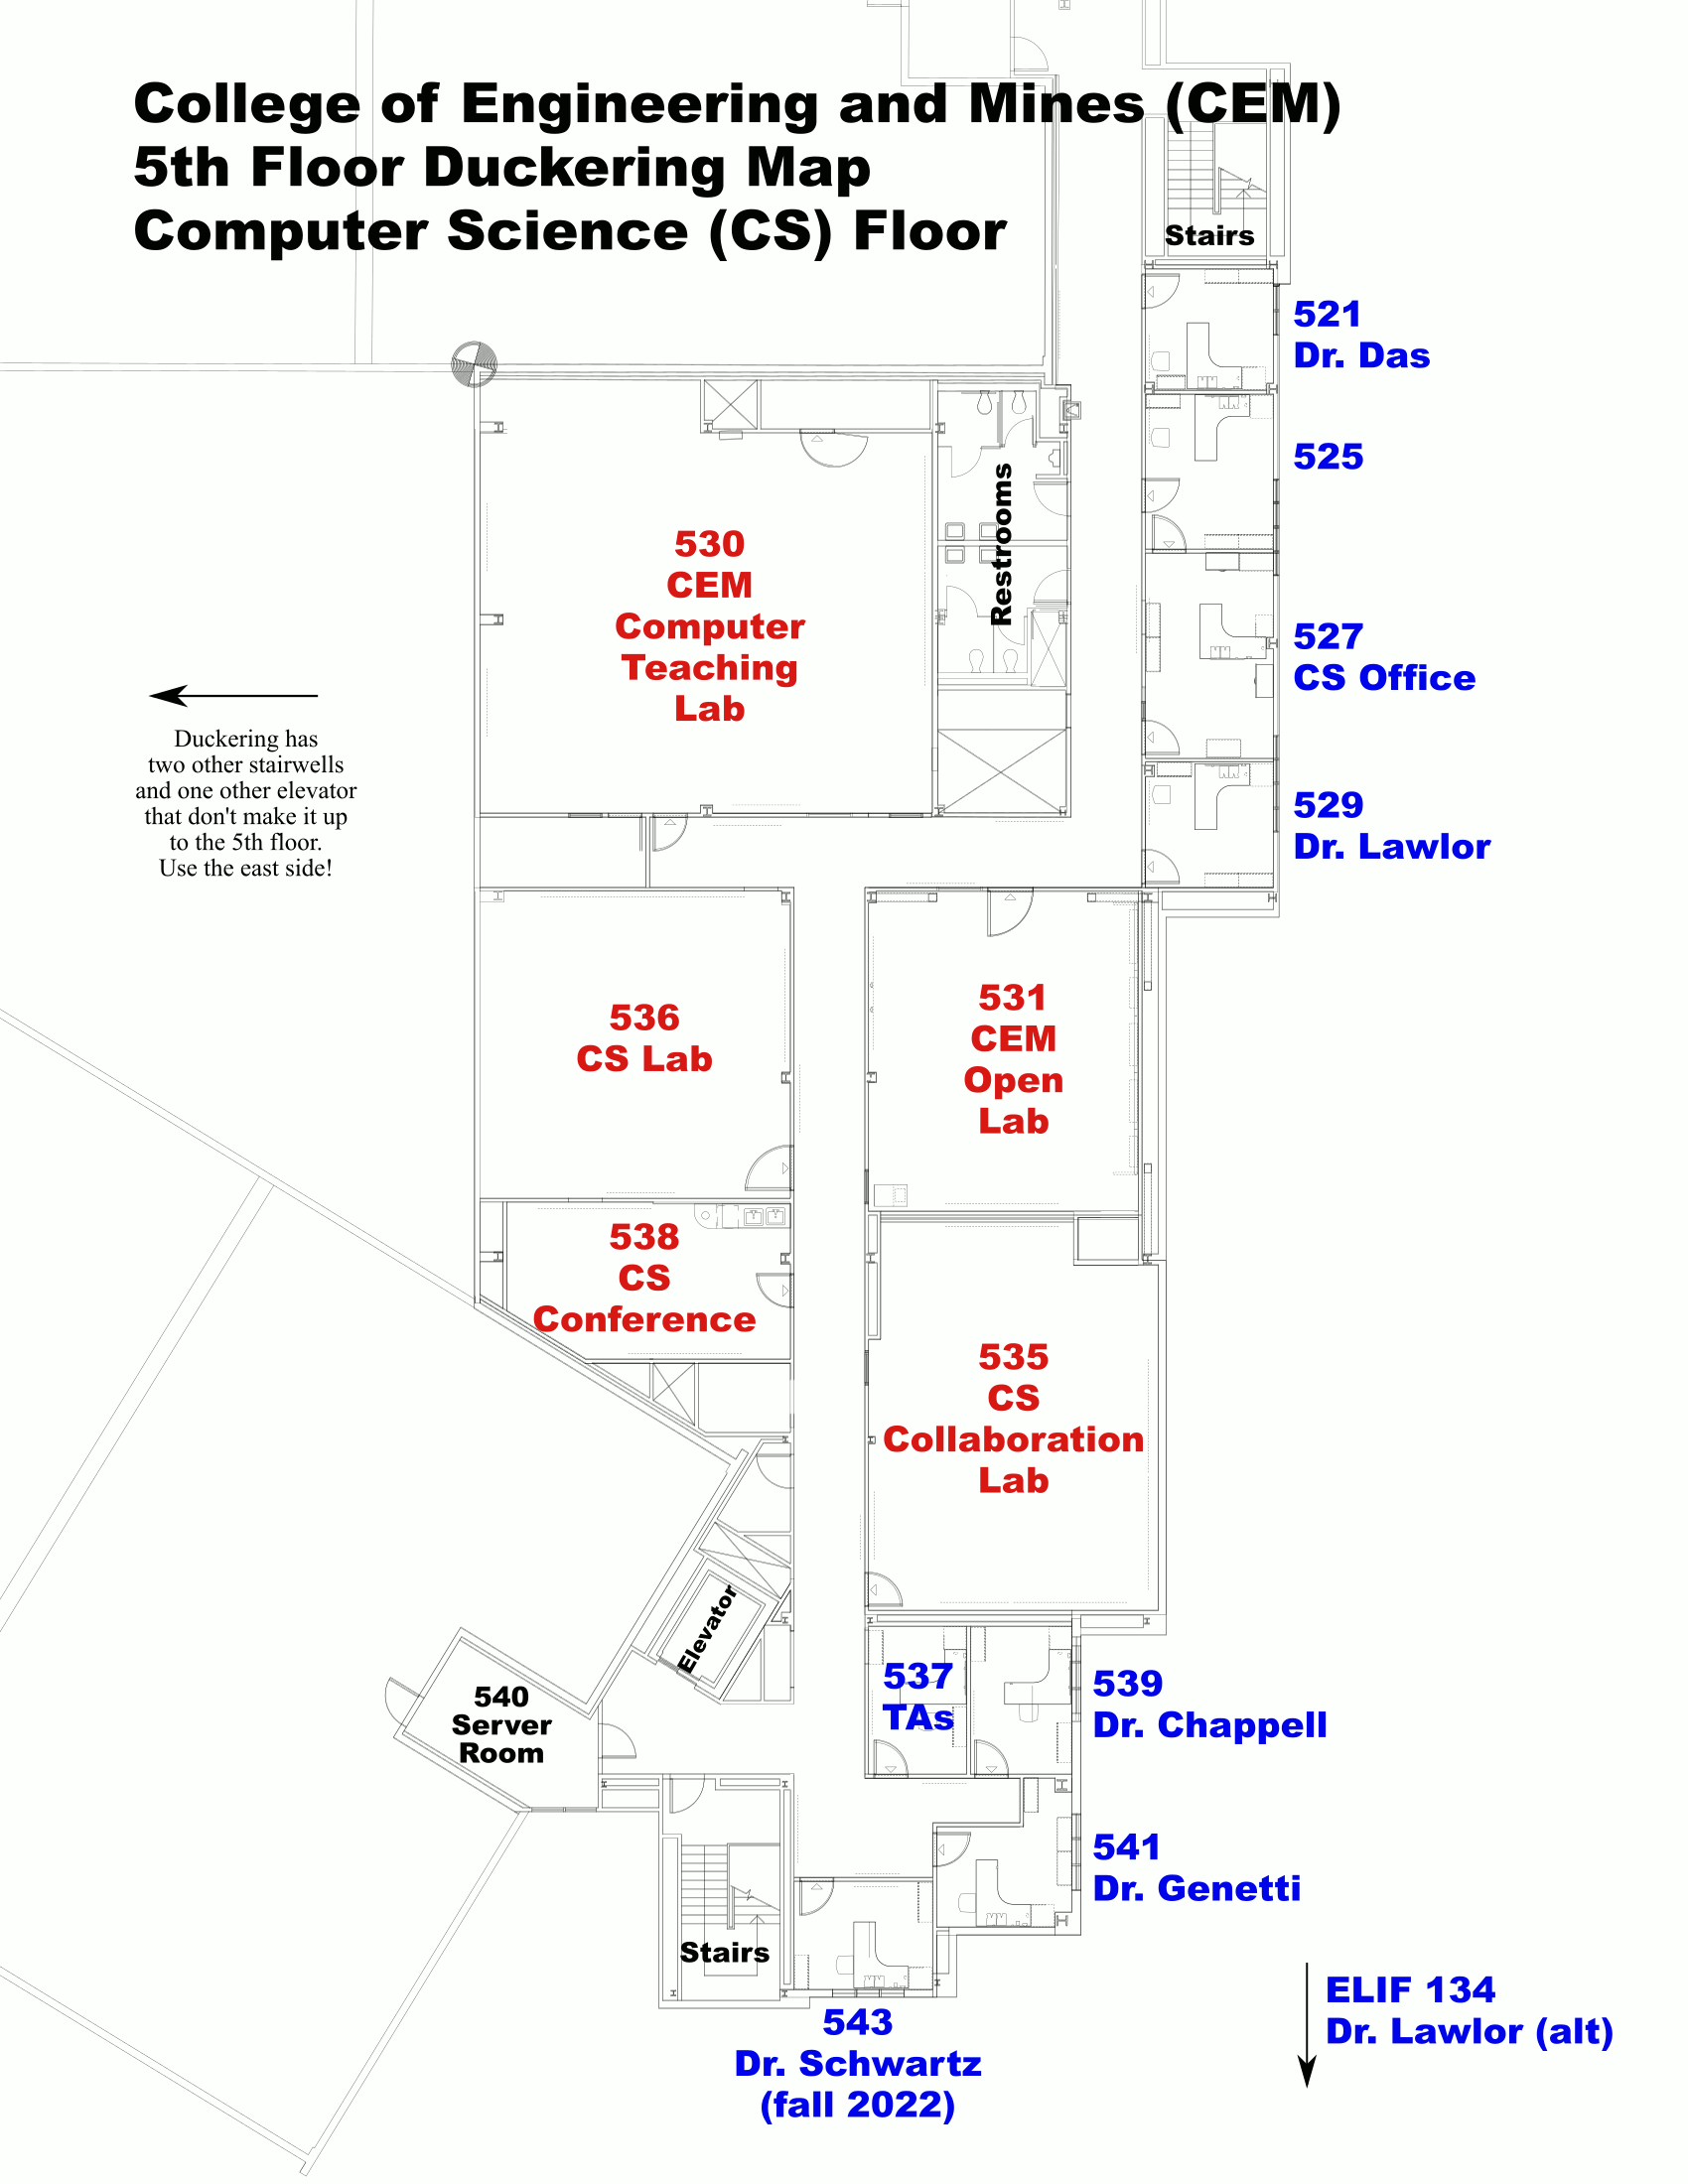 5th floor map, top down view